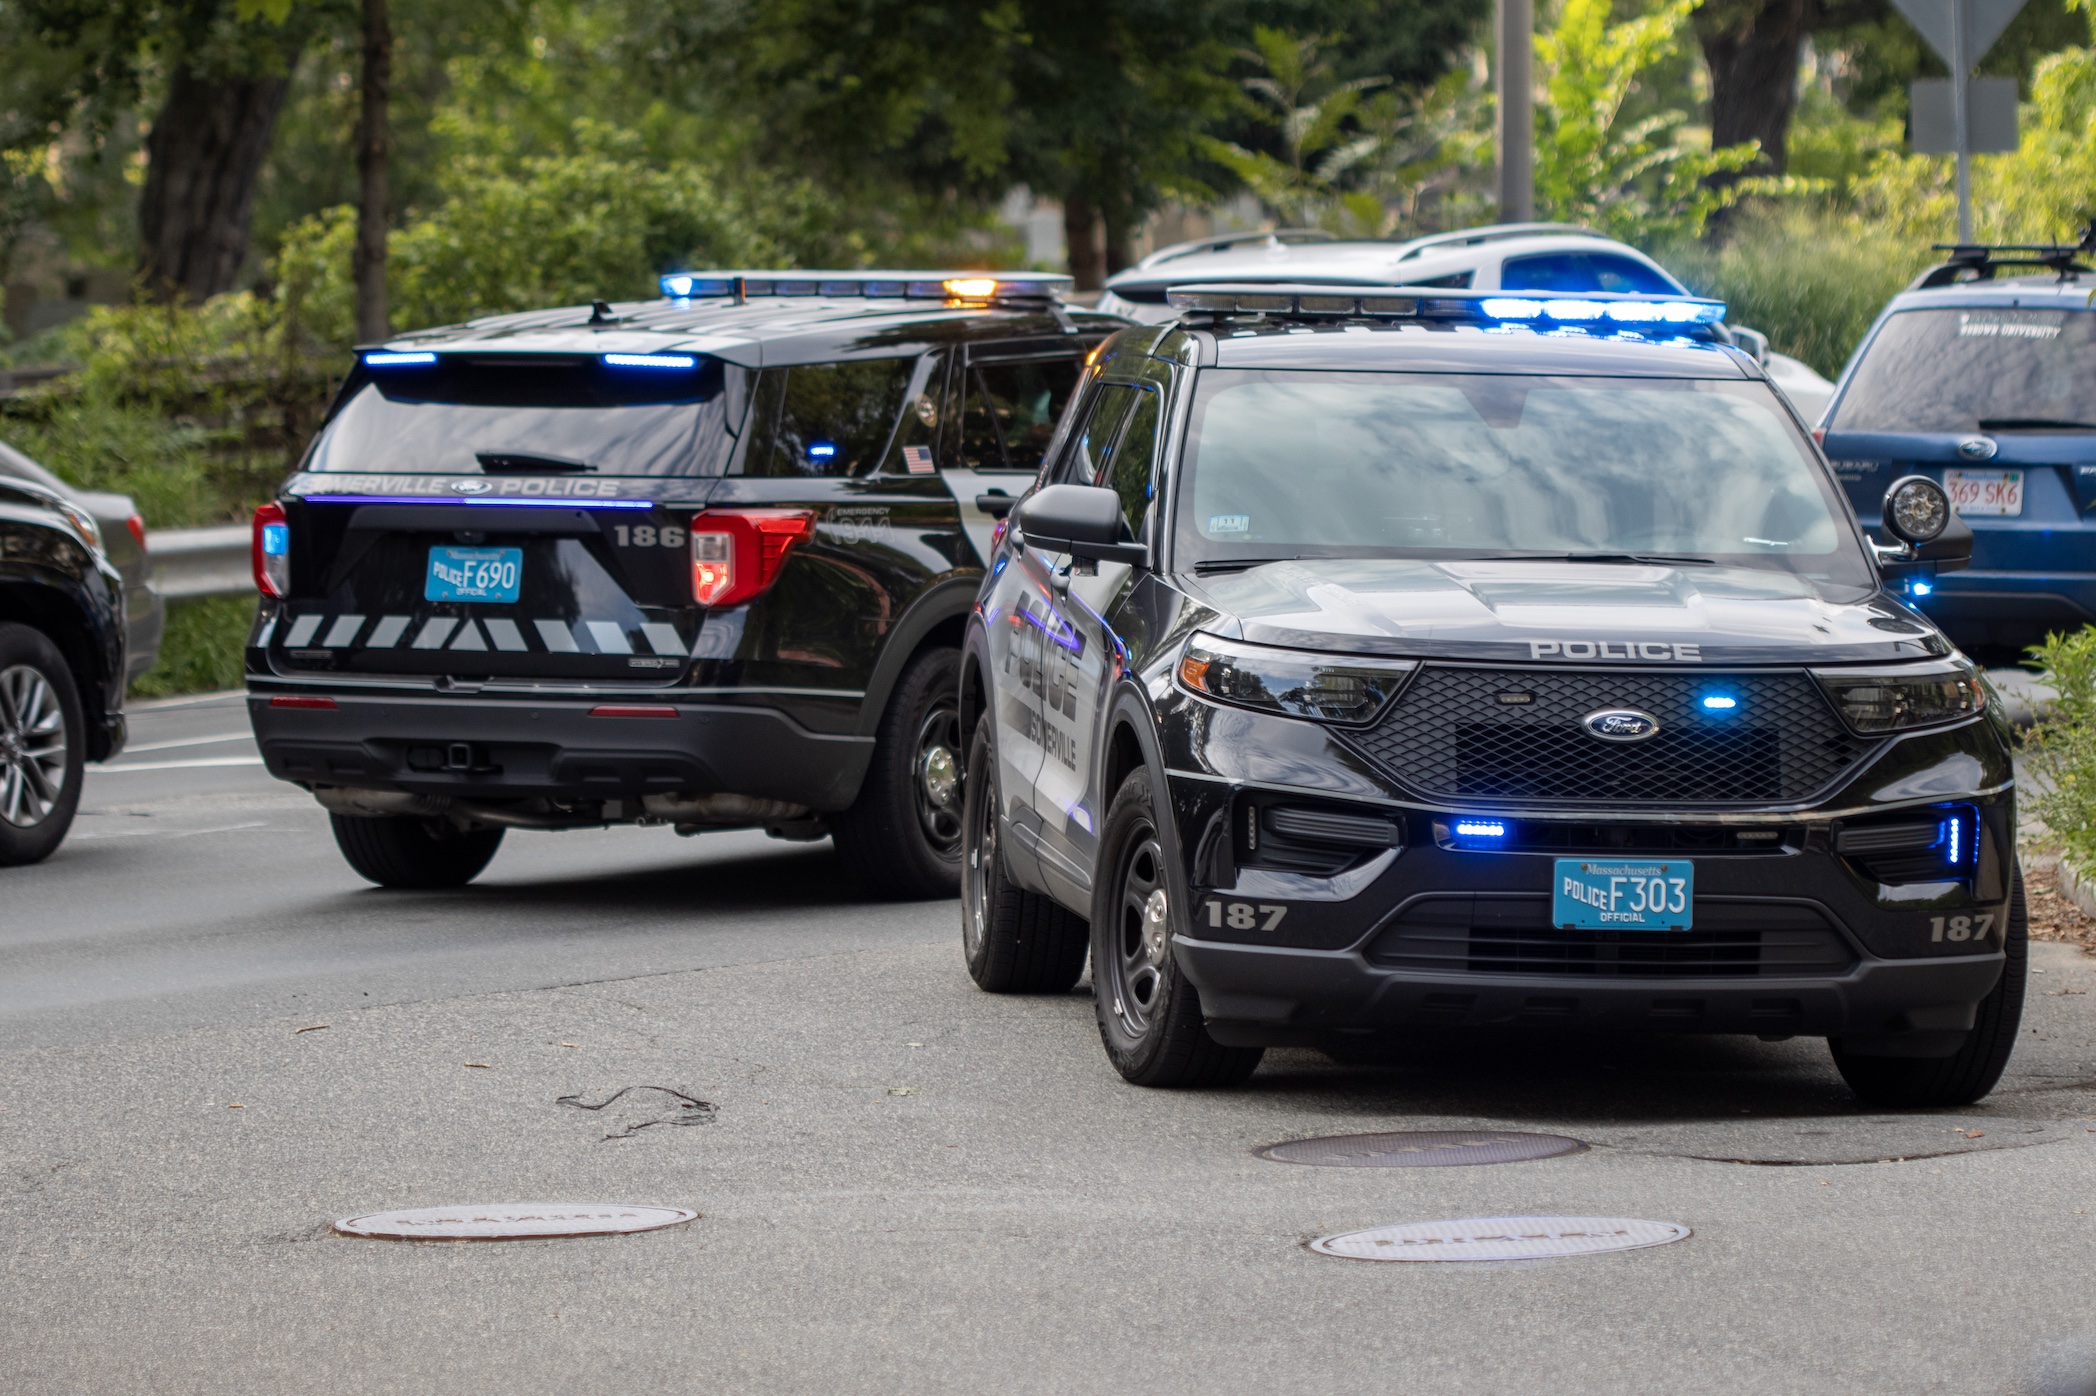 Police vehicles on scene at accident; image by Aaron Doucett, via Unsplash.com.